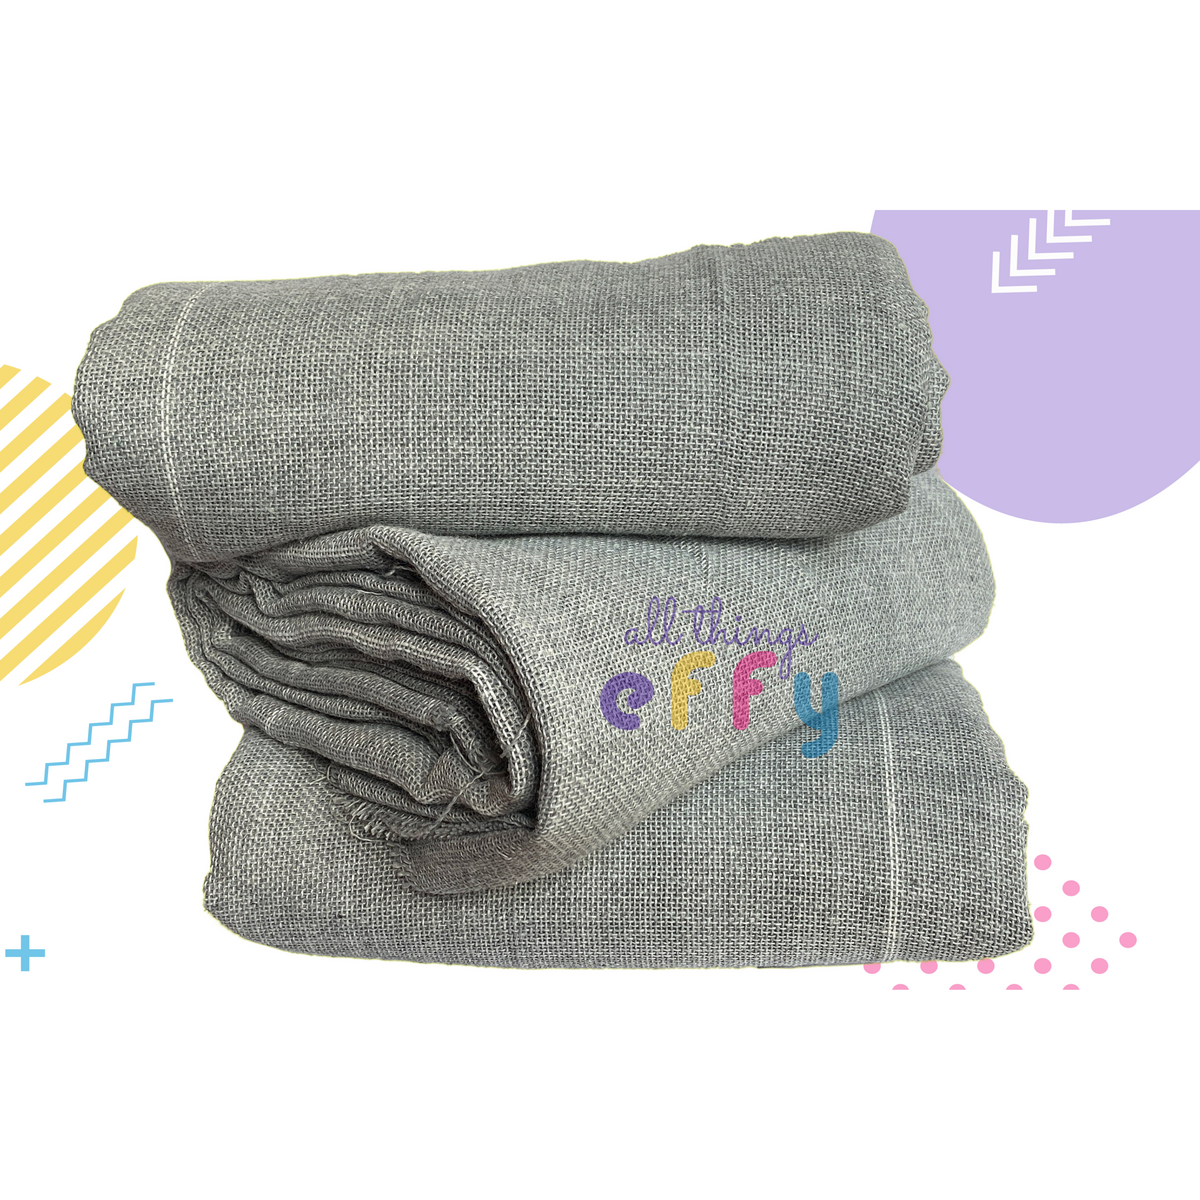 Premium German Grey Primary Tufting Cloth - AVAILABLE!